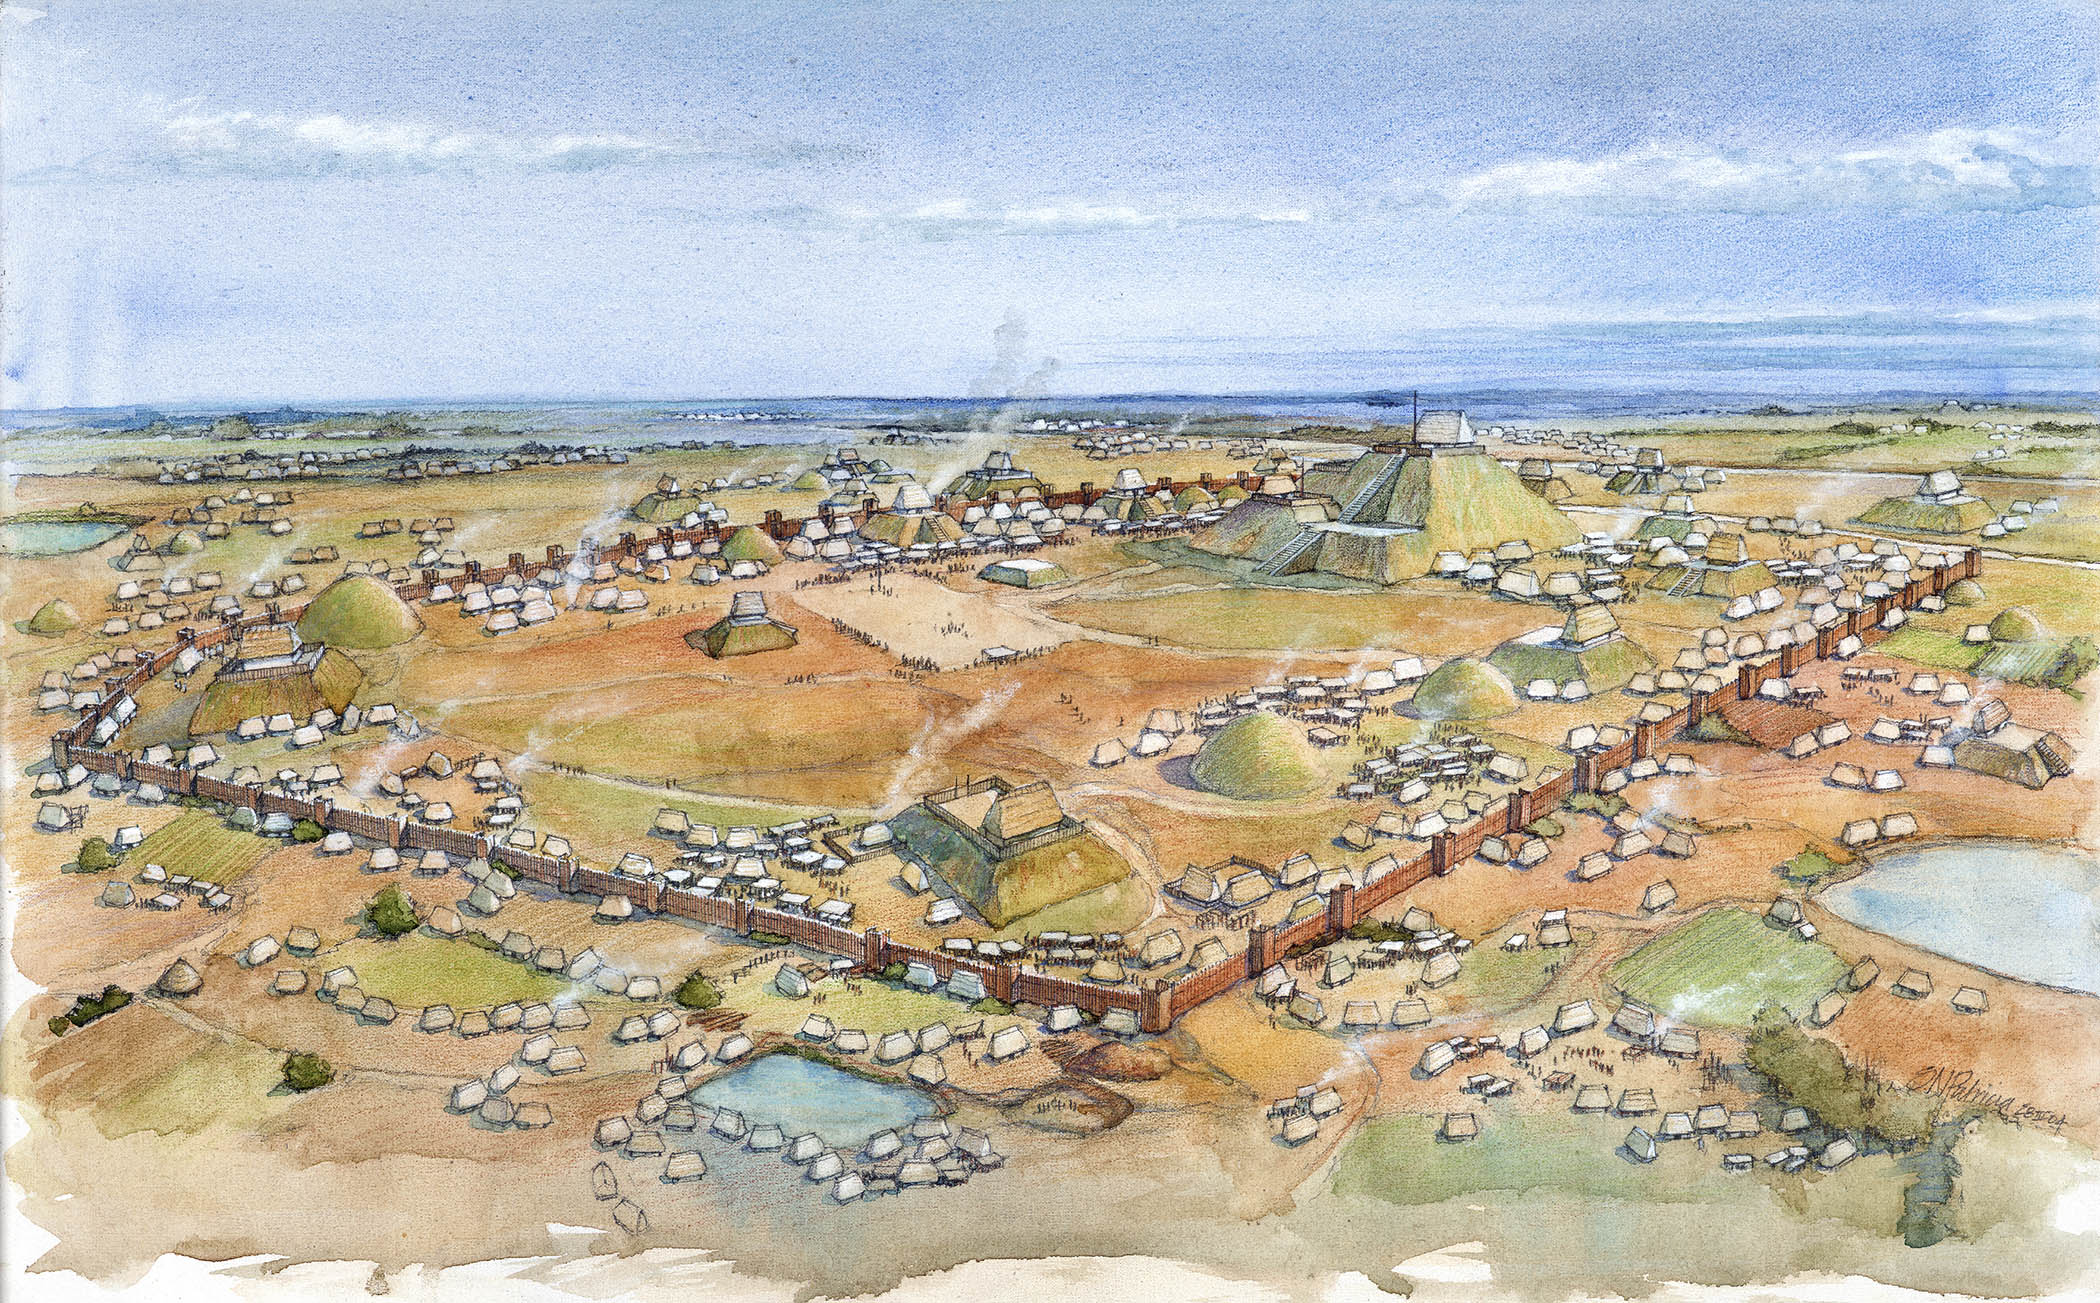 A prehistoric city with homes, earthen mounds, and pathways